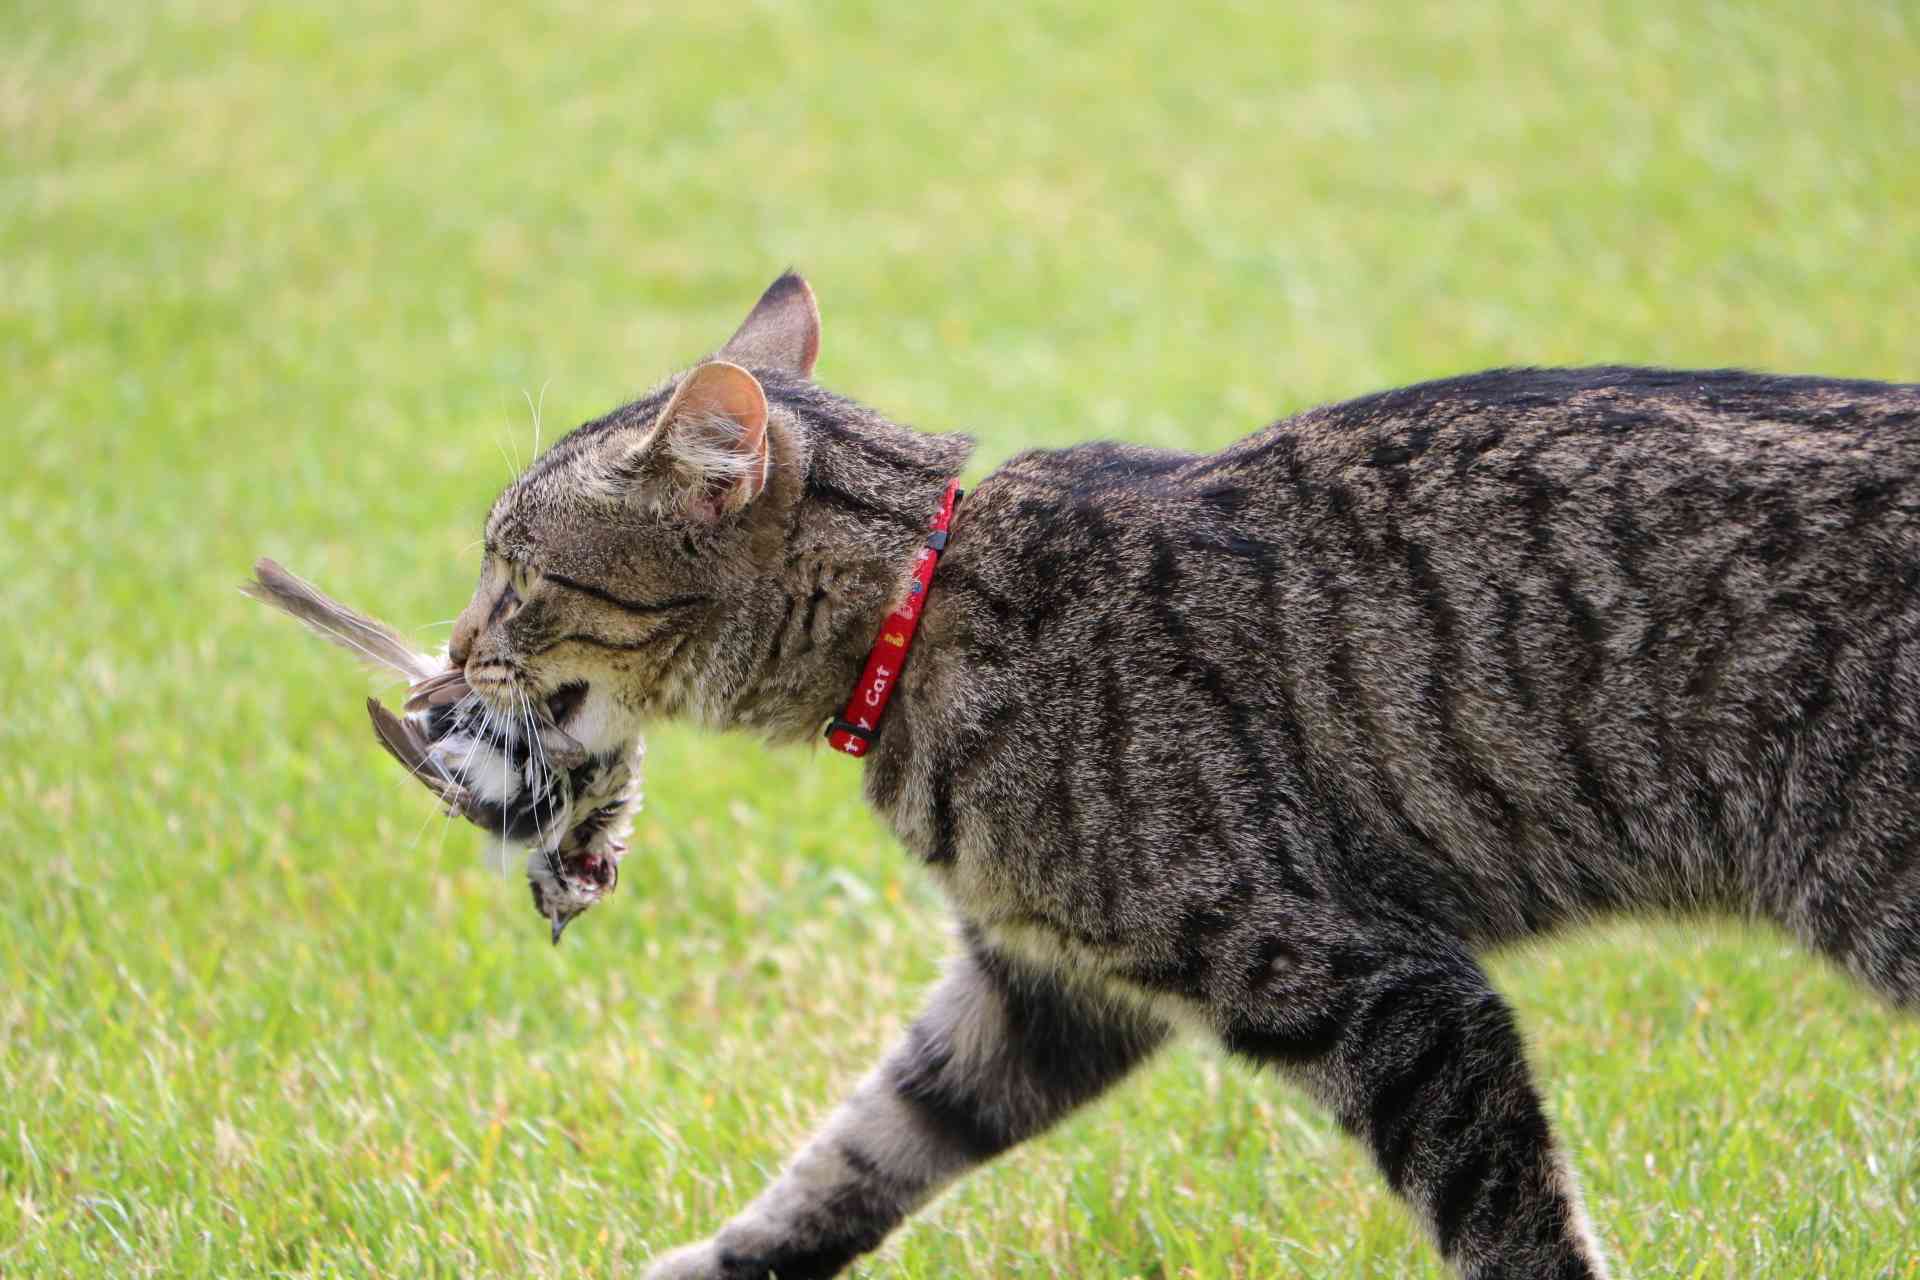 Cat carrying prey in its mouth across a grassy field